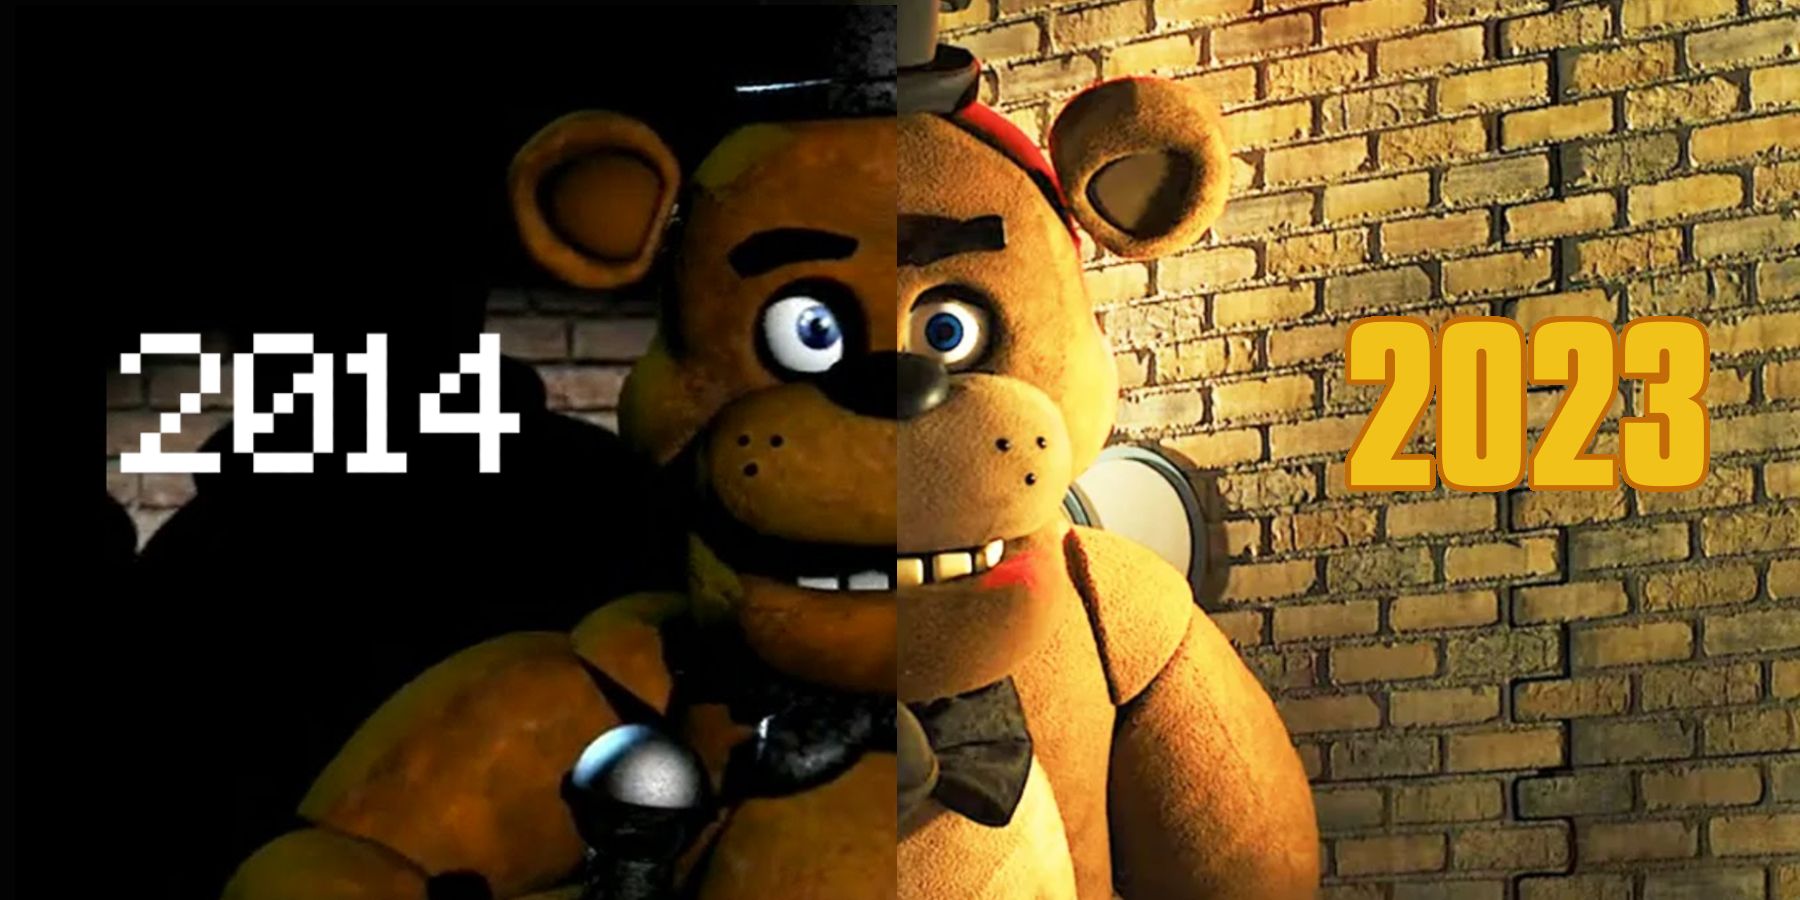 The FNAF movie is doing not so good in terms of critical reception